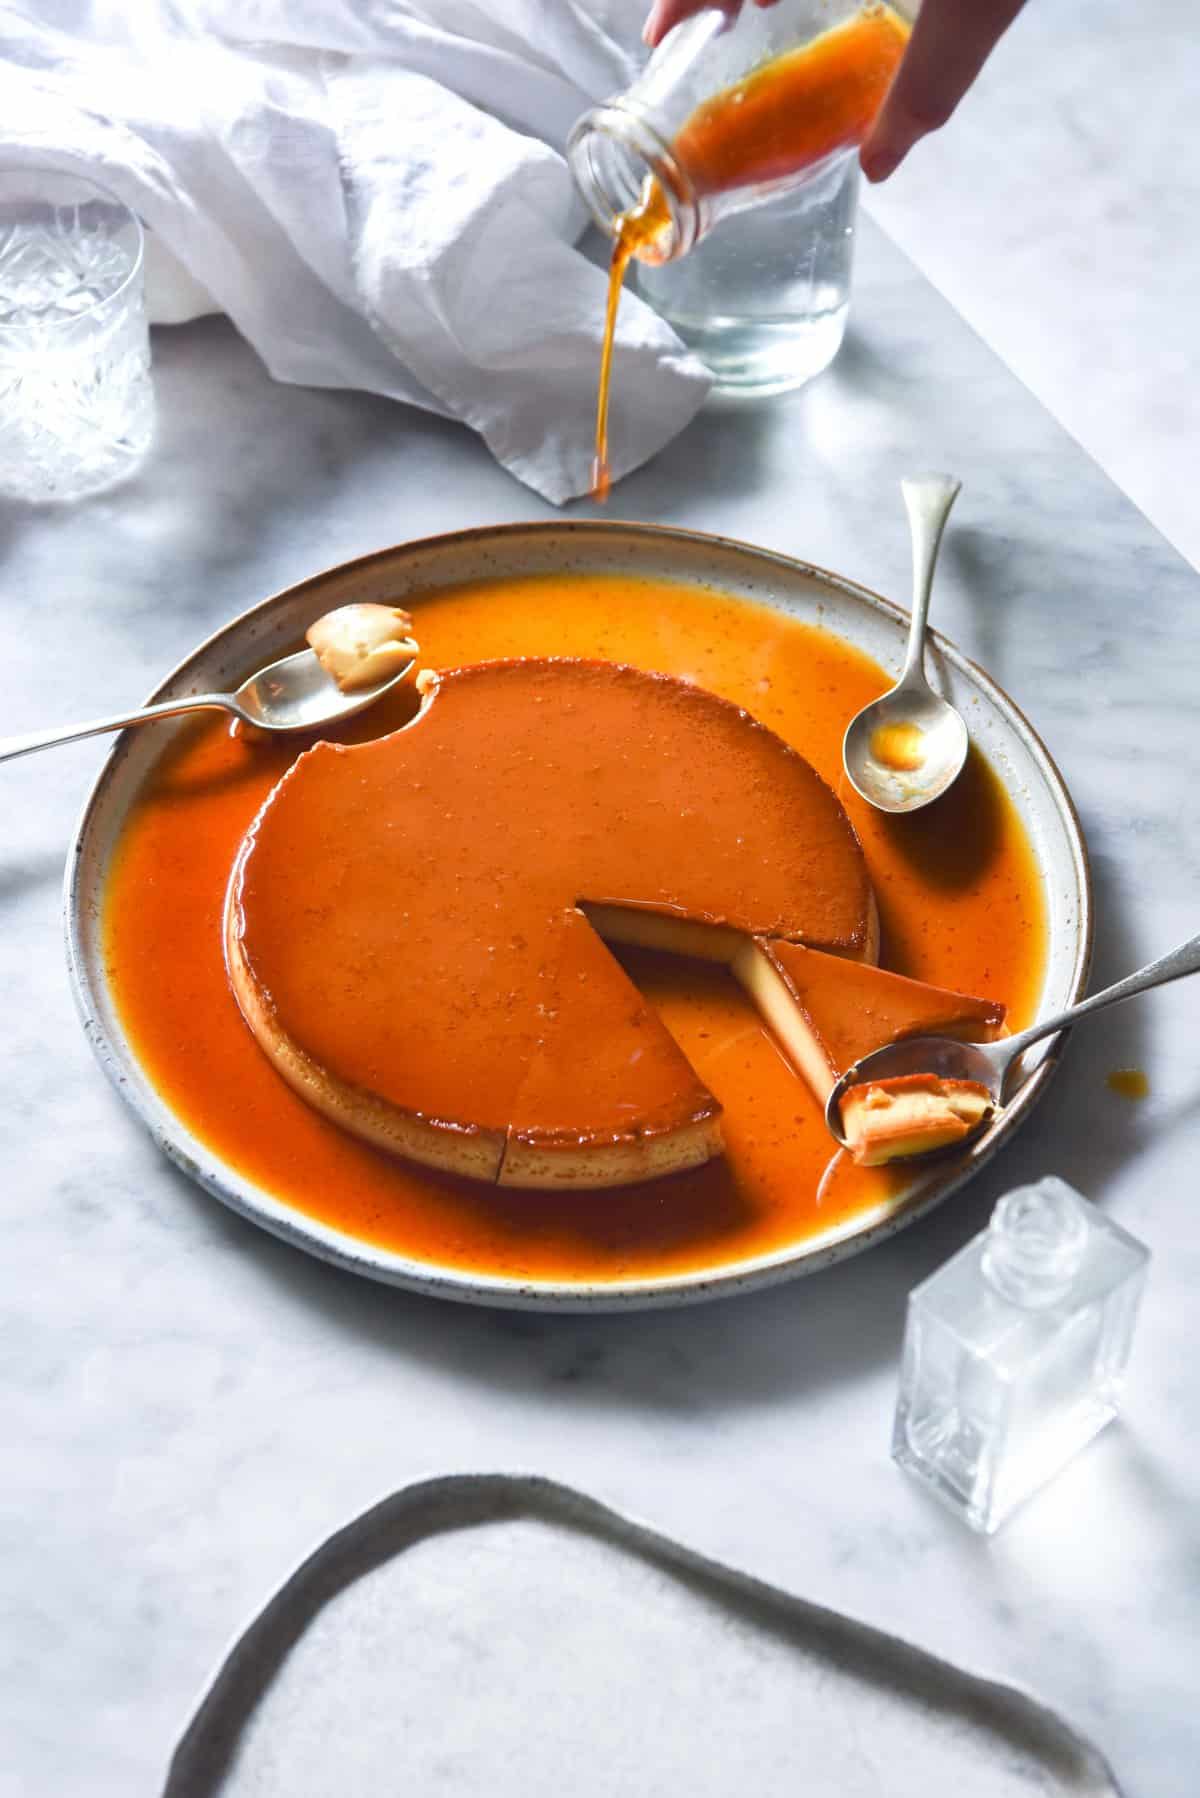 Lactose free and FODMAP friendly creme caramel from www.georgeats.com